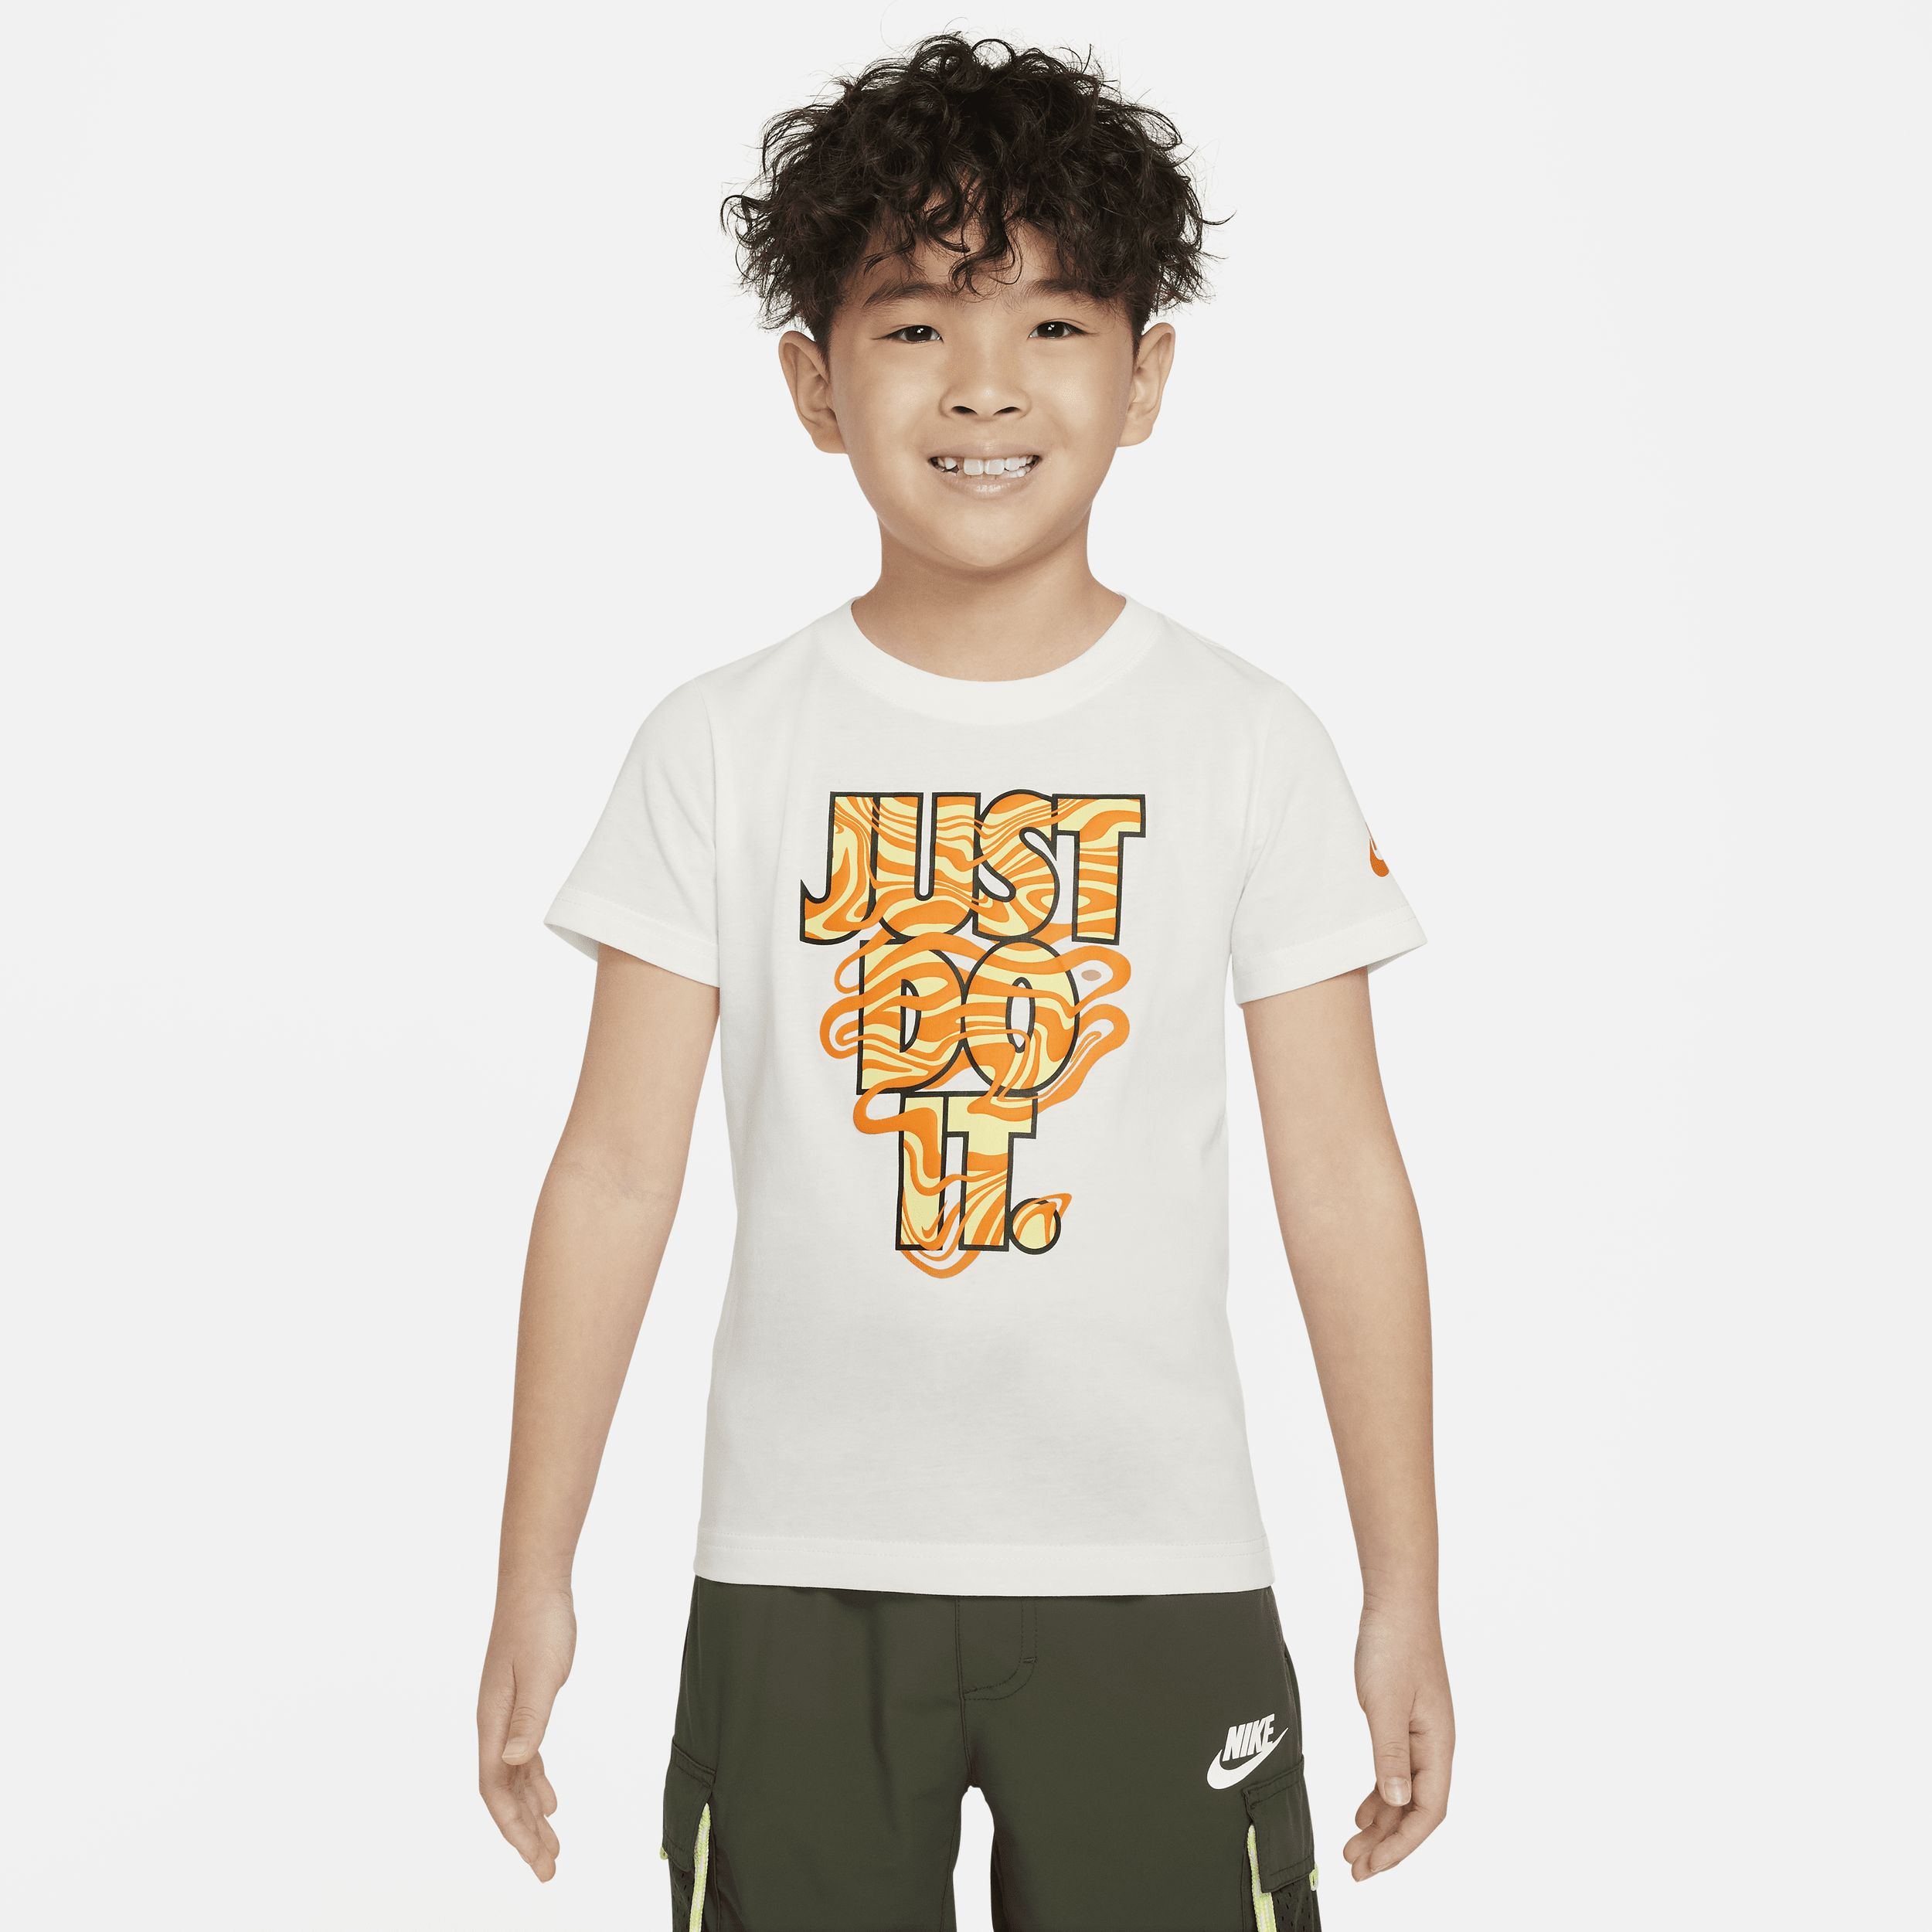 Nike "just Do It" Little Kids' Graphic T-shirt In White